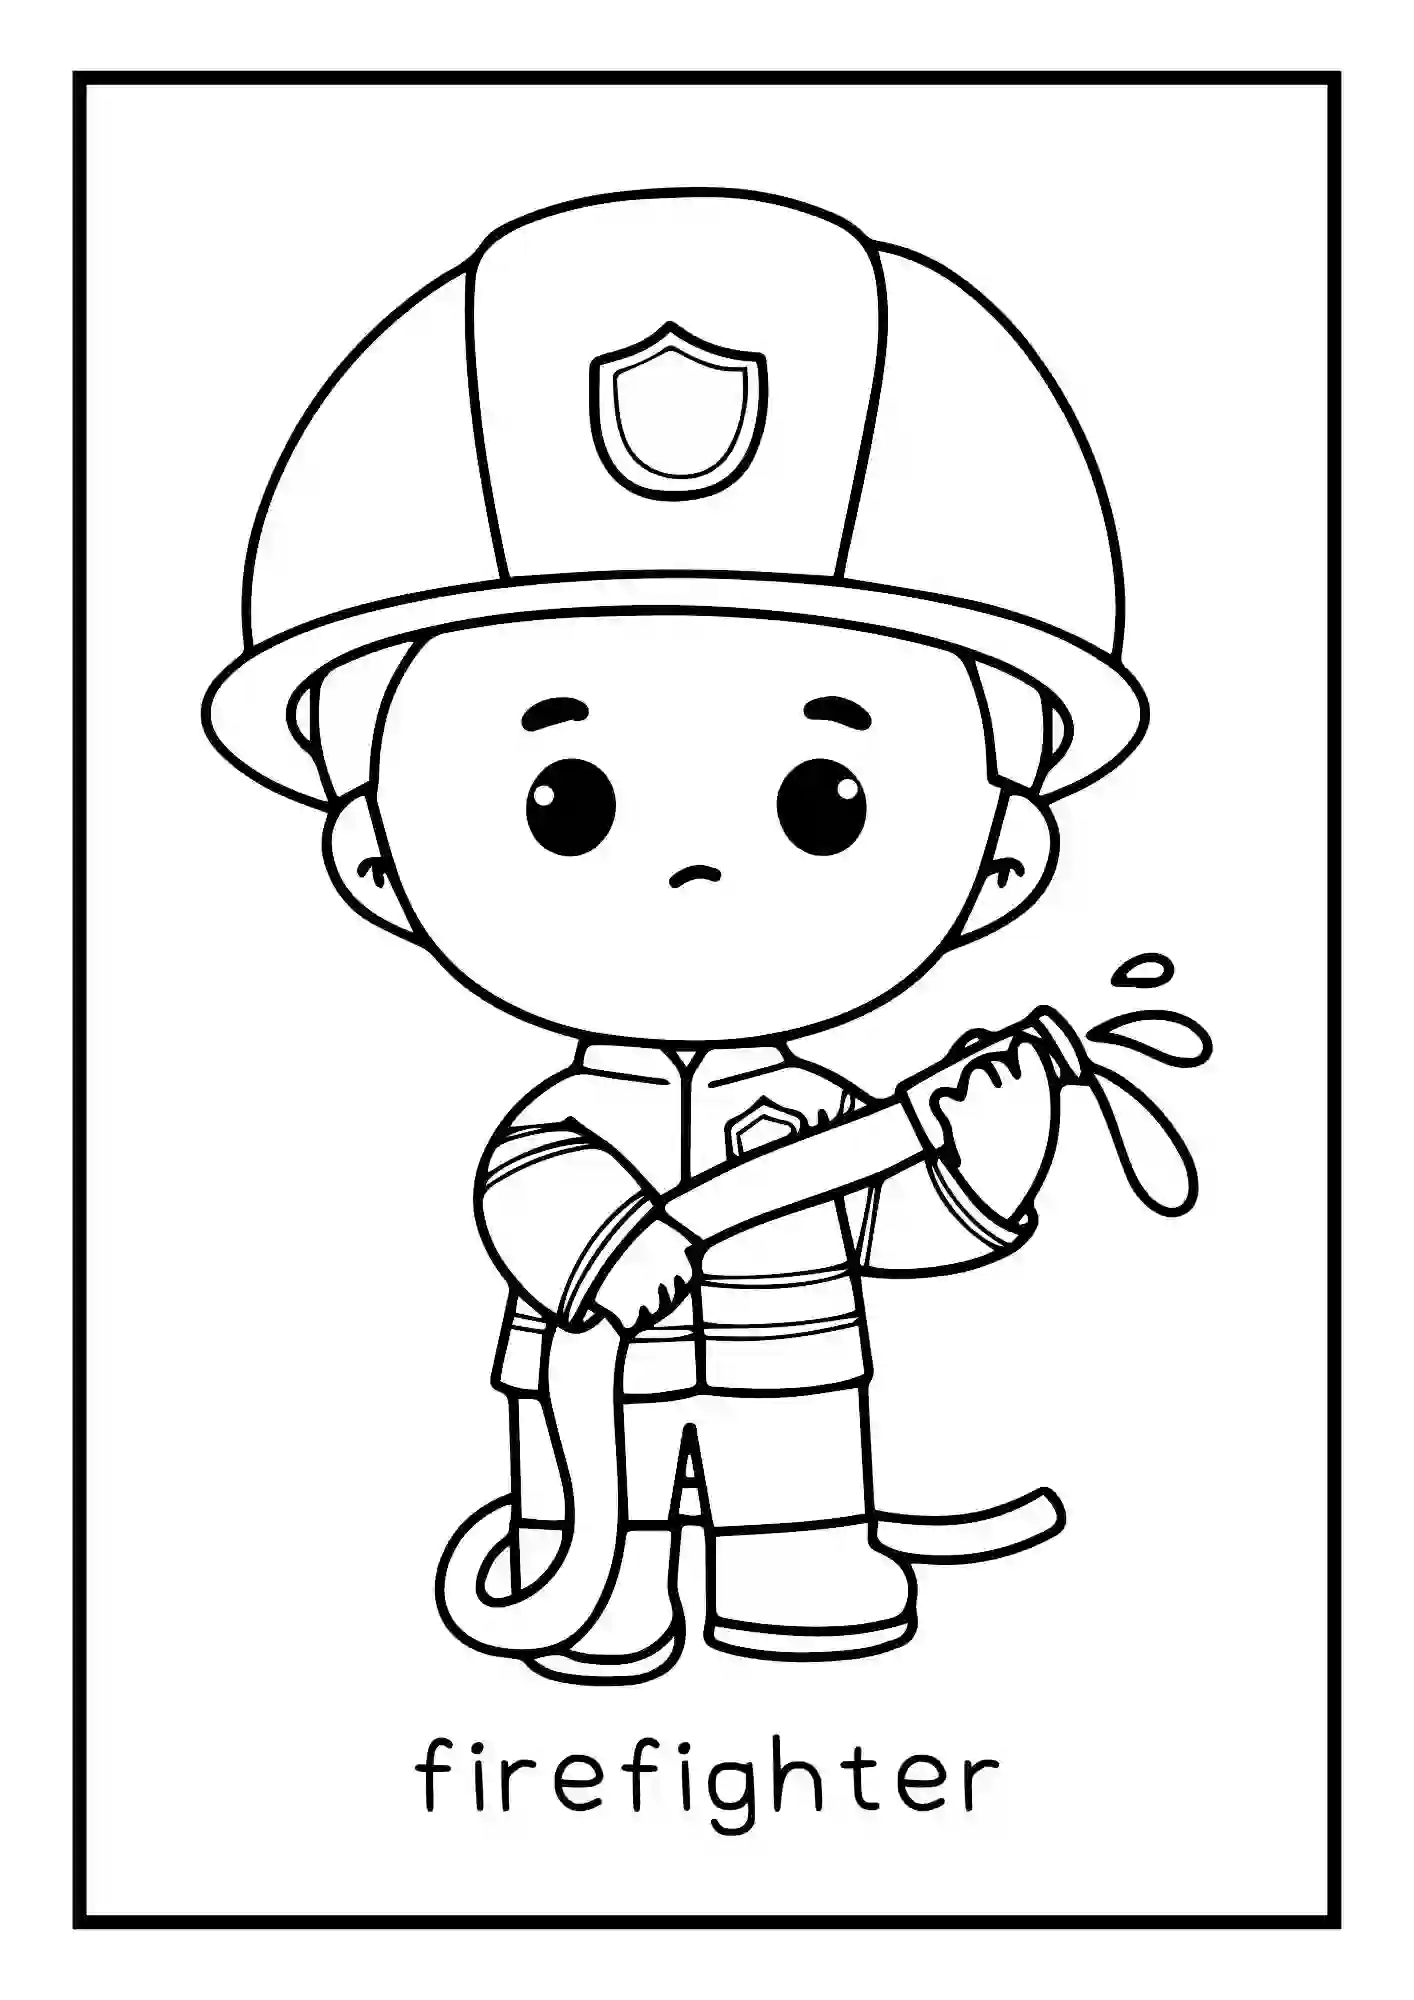 Different Professions, occupations, carriers, jobs, Coloring Worksheets (firefighter)